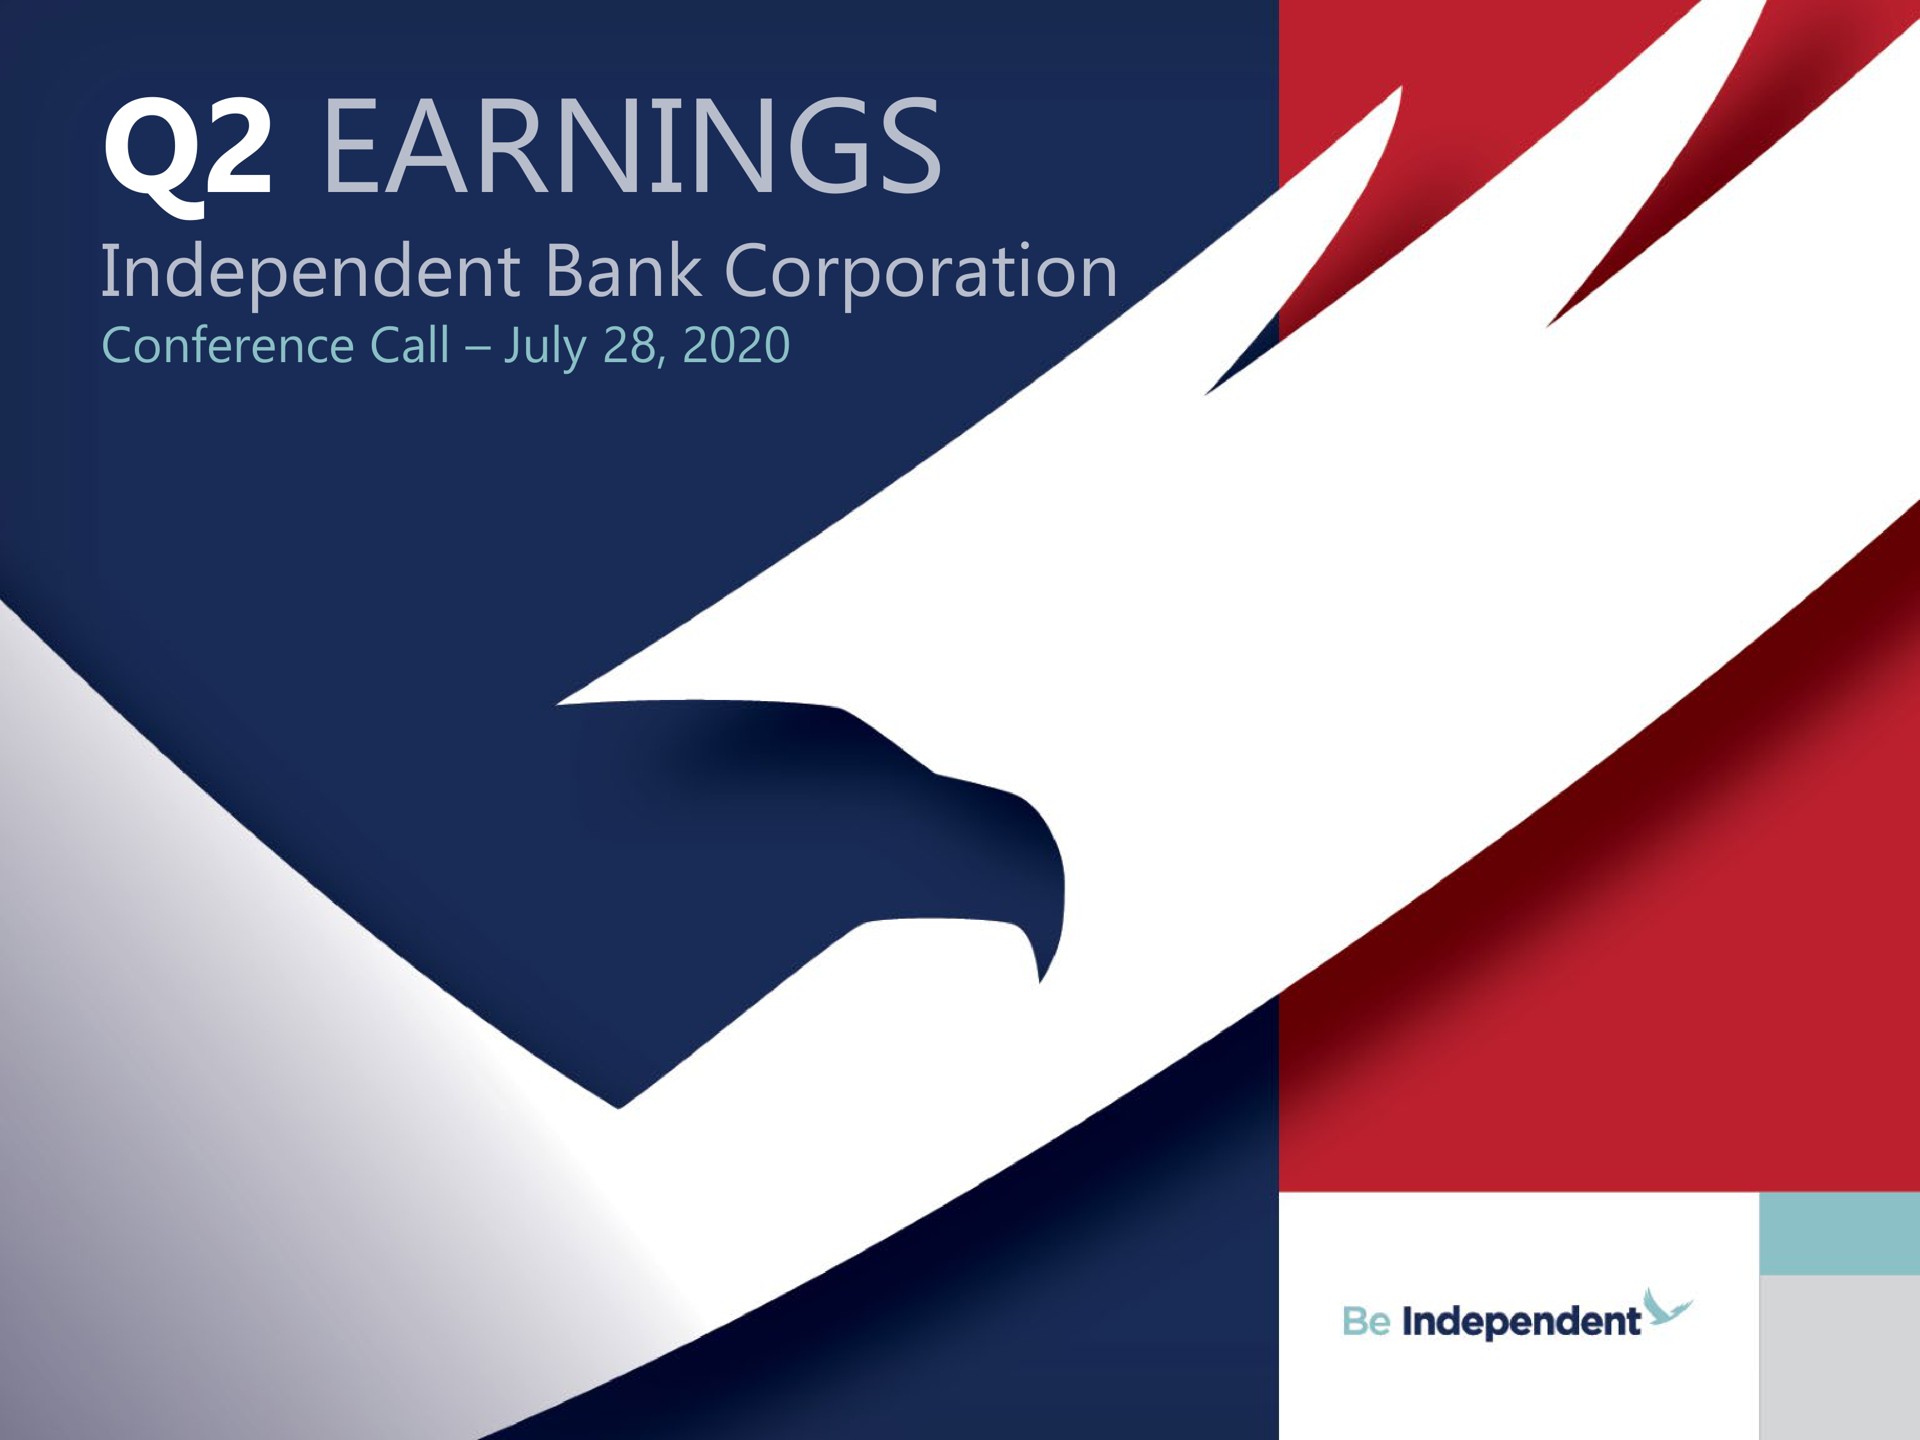 earnings independent bank corporation conference call | Independent Bank Corp